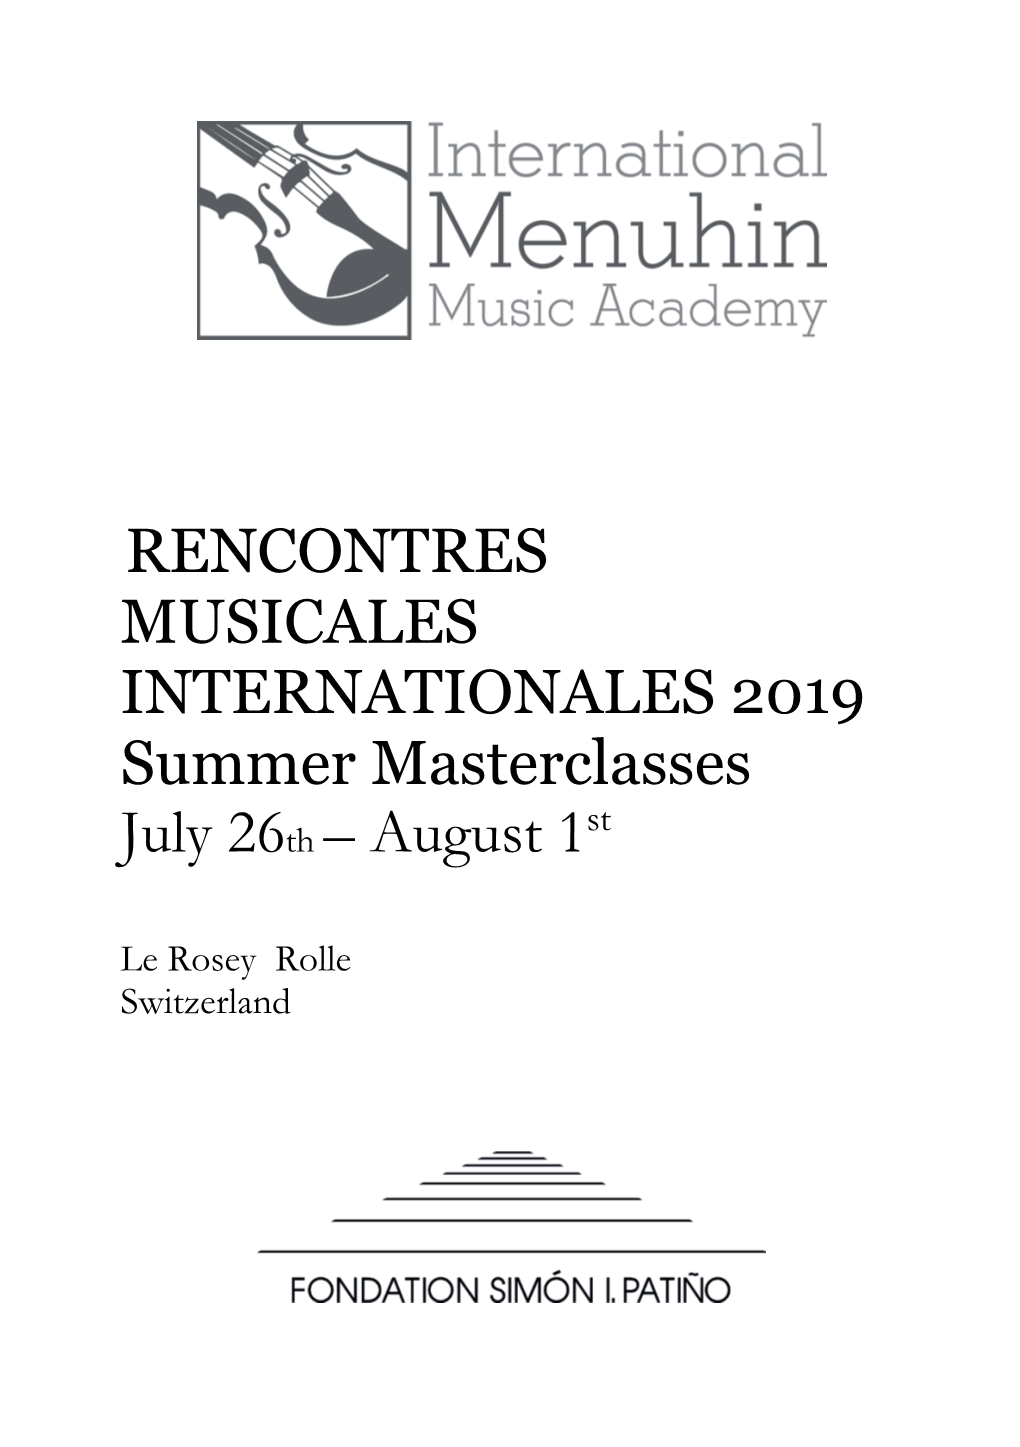 RENCONTRES MUSICALES INTERNATIONALES 2019 Summer Masterclasses St July 26Th – August 1